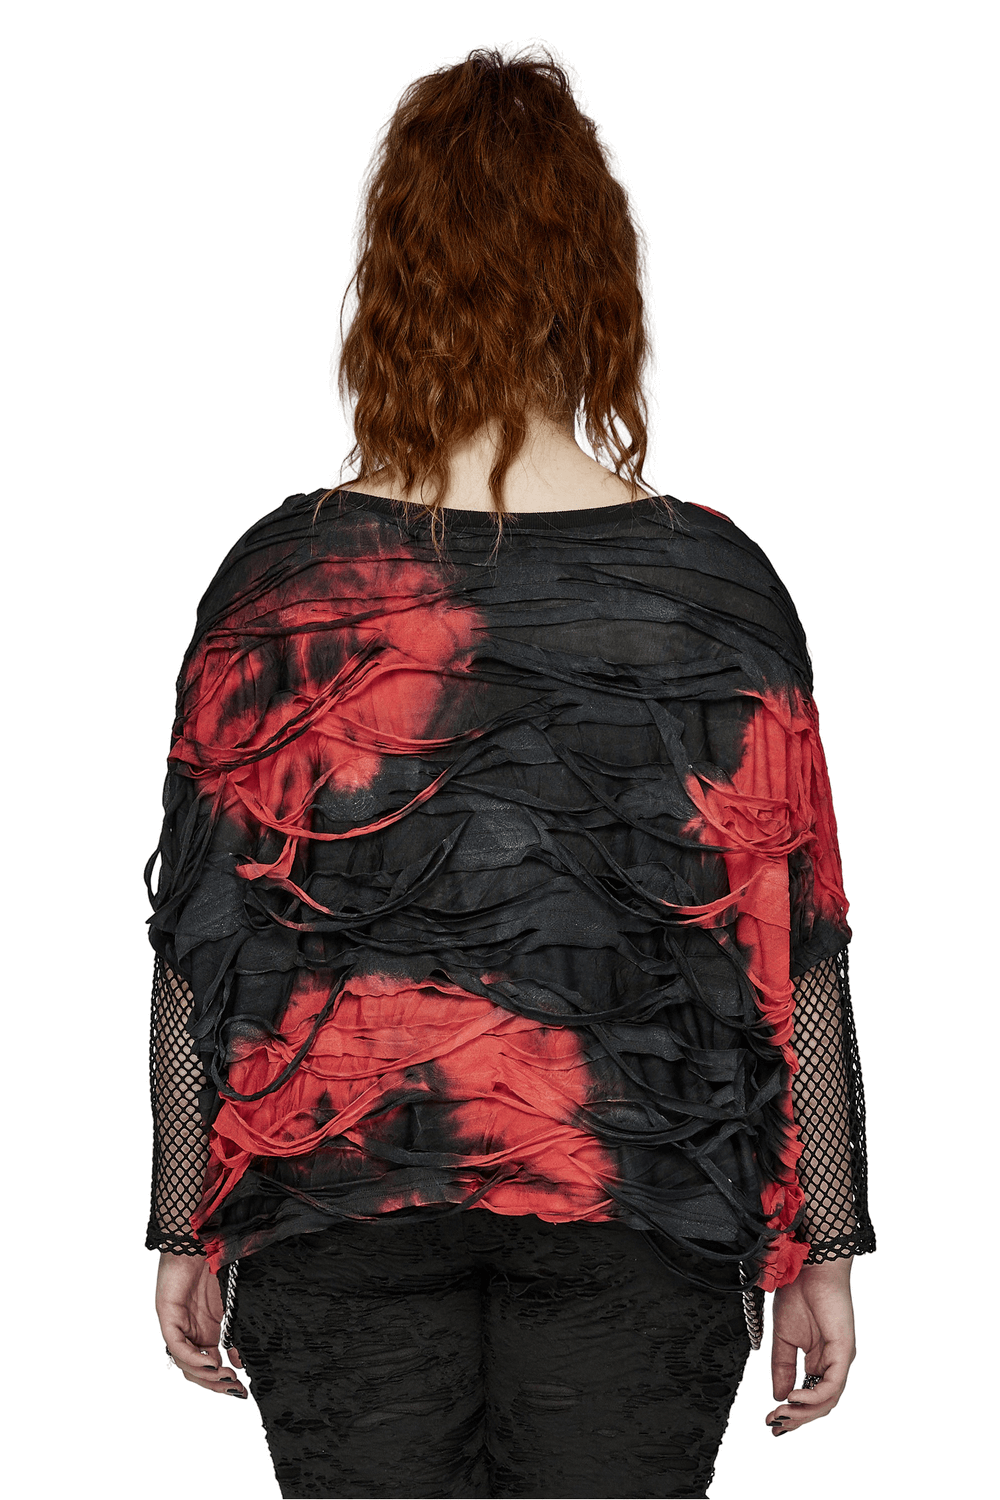 Edgy Punk Tie-Dye Loose Top with Mesh Sleeves for Women